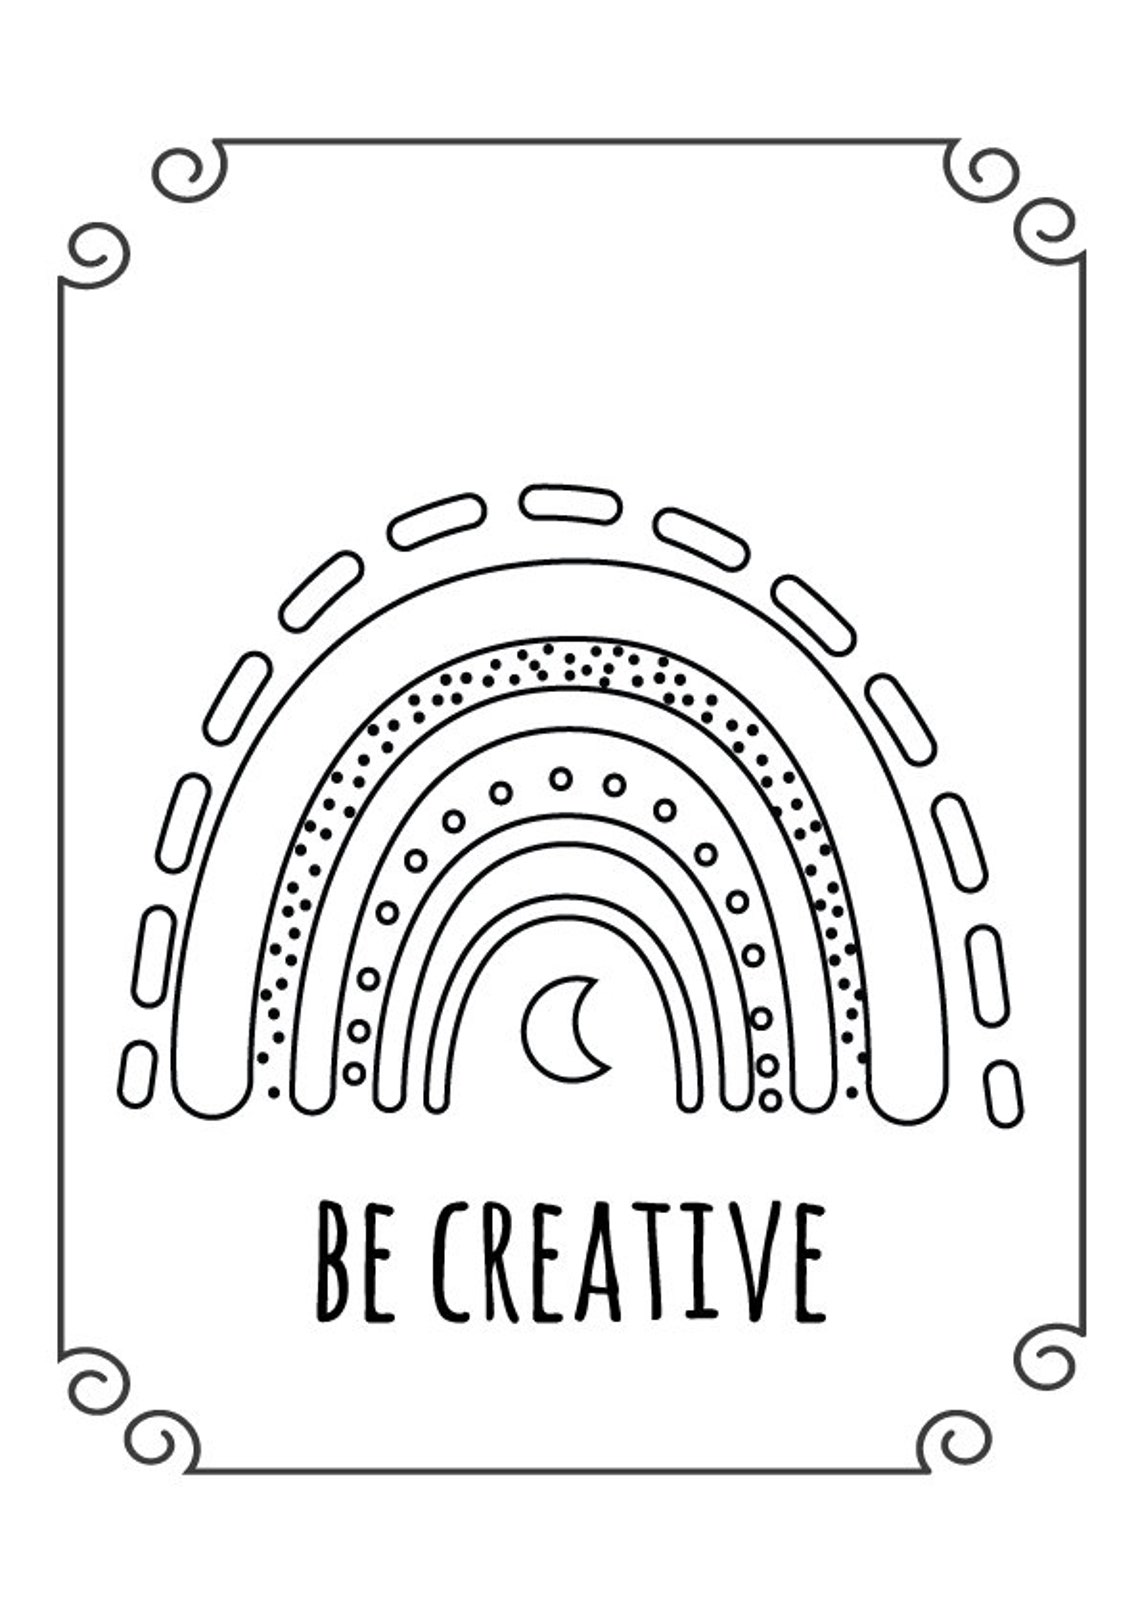 boho-style-coloring-pages-coloring-pages